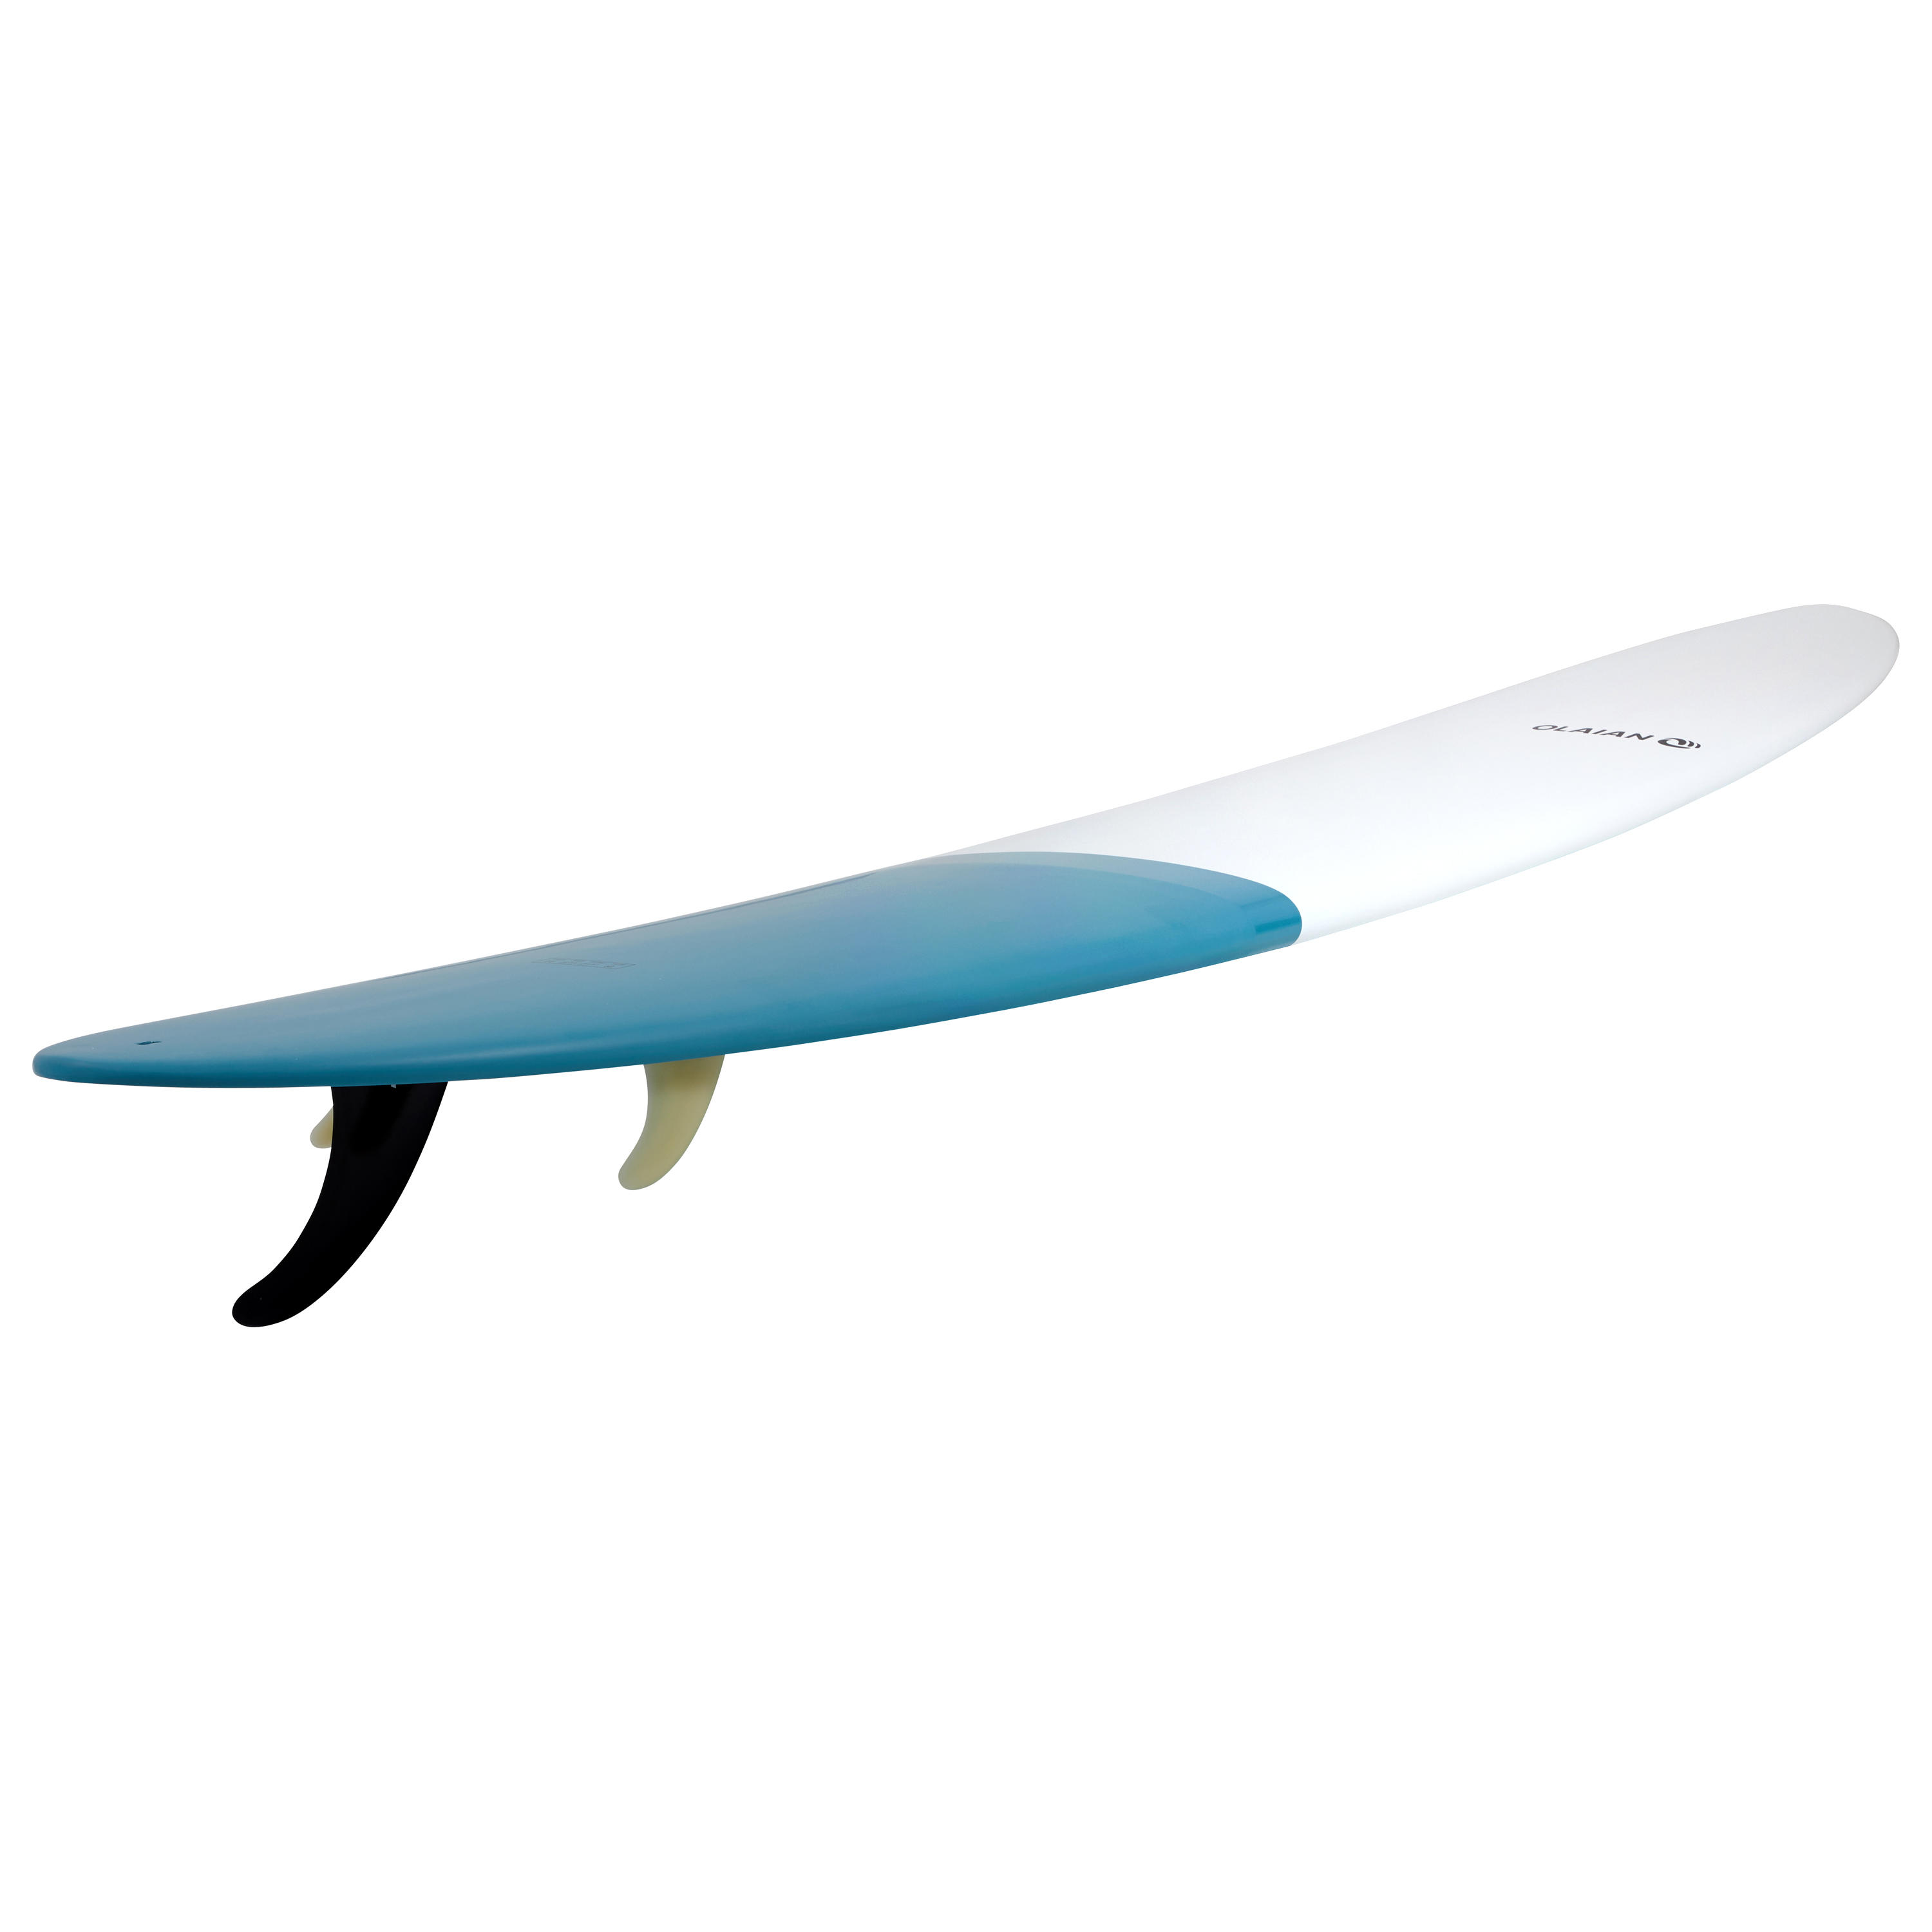 SURFBOARD LONGBOARD 900 Performance 9'. Comes with 2+1 fins. 3/10